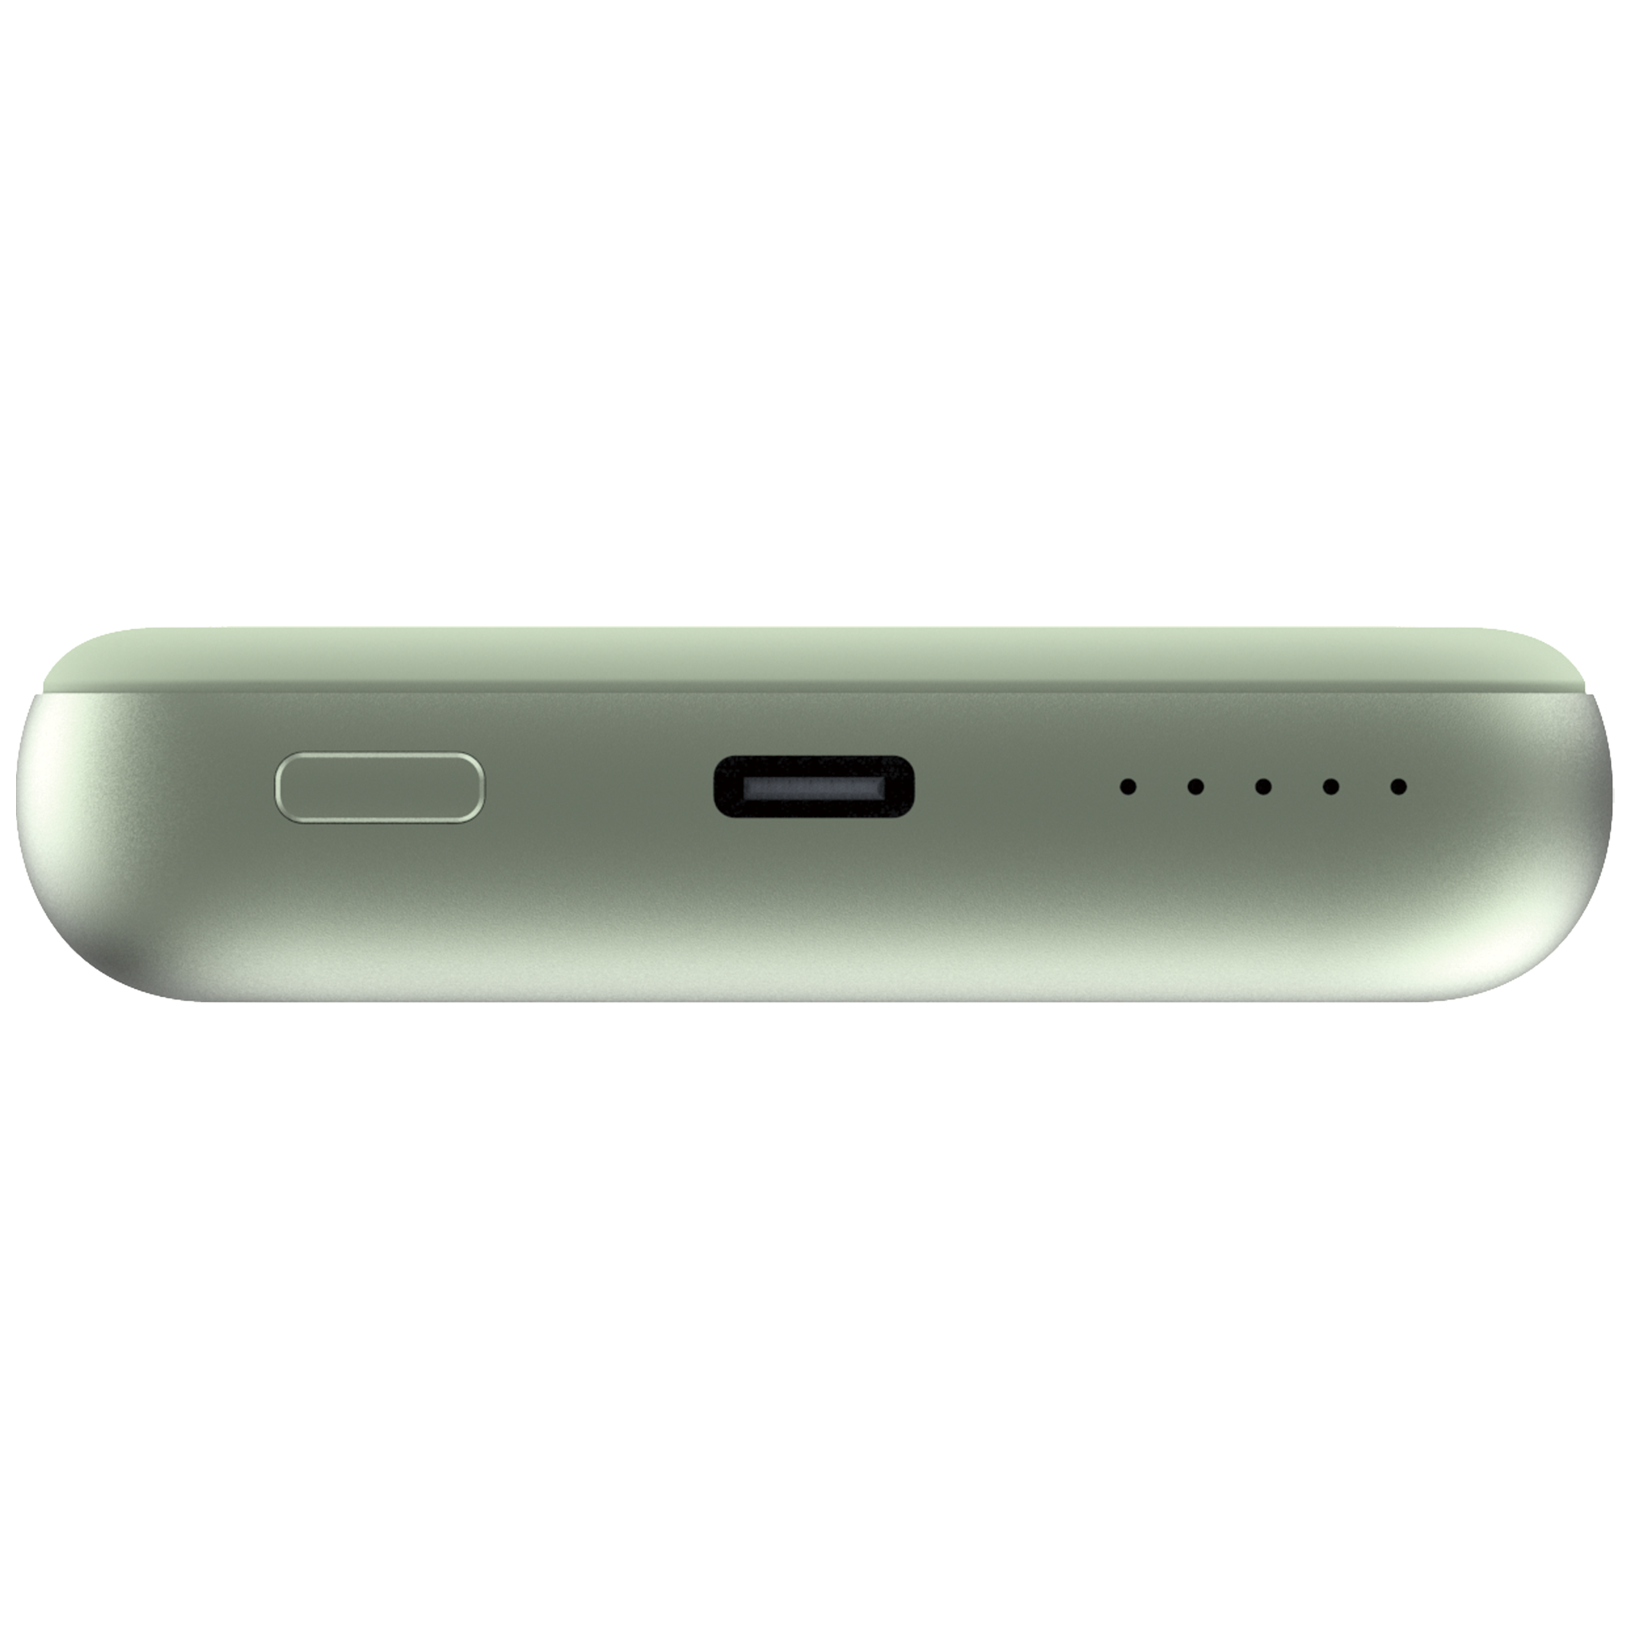 Charge 'n' Go Magnetic Wireless Power Bank 10000mAh Green